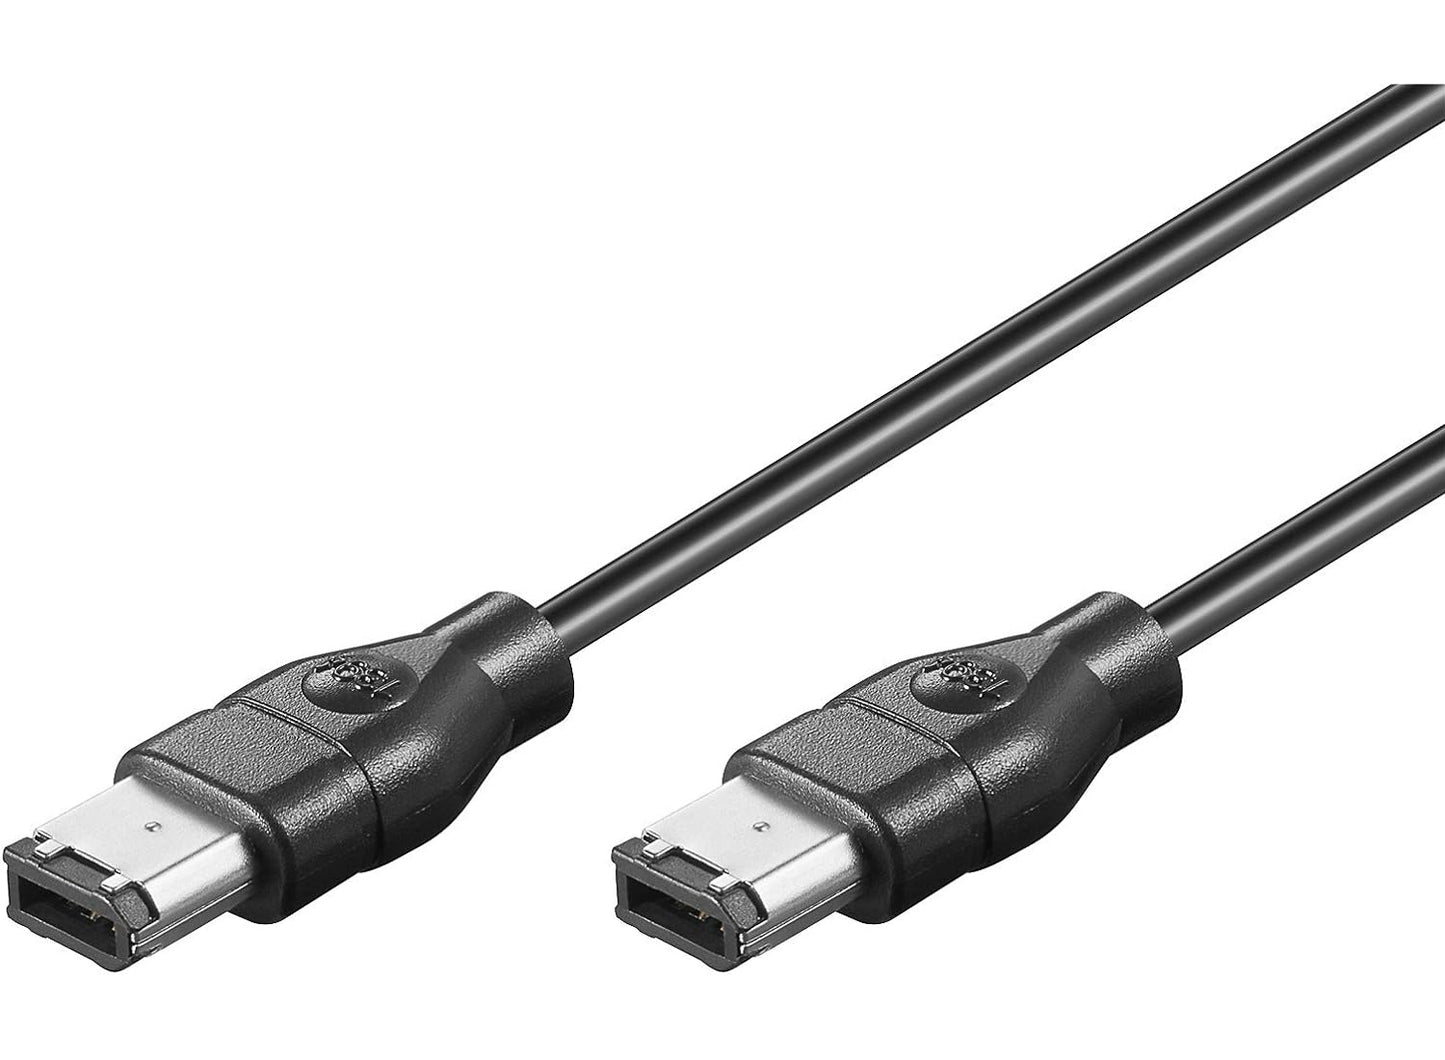 Life Firewire 1394 PC Adapter Cable 6M - 6M, 1.8m PC Cable